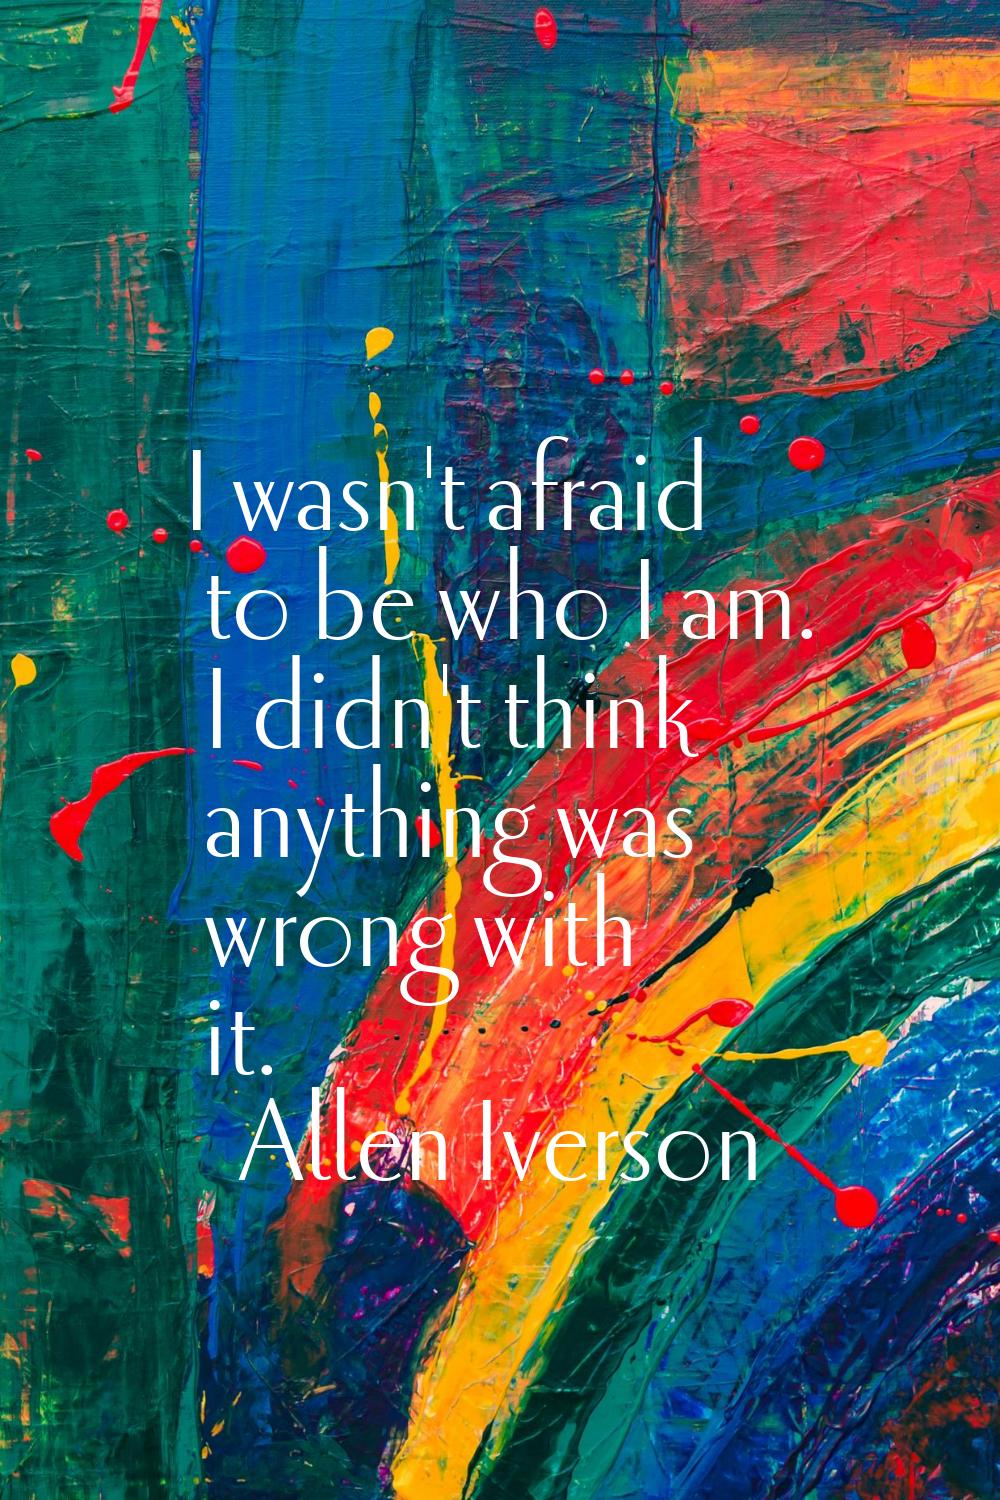 I wasn't afraid to be who I am. I didn't think anything was wrong with it.